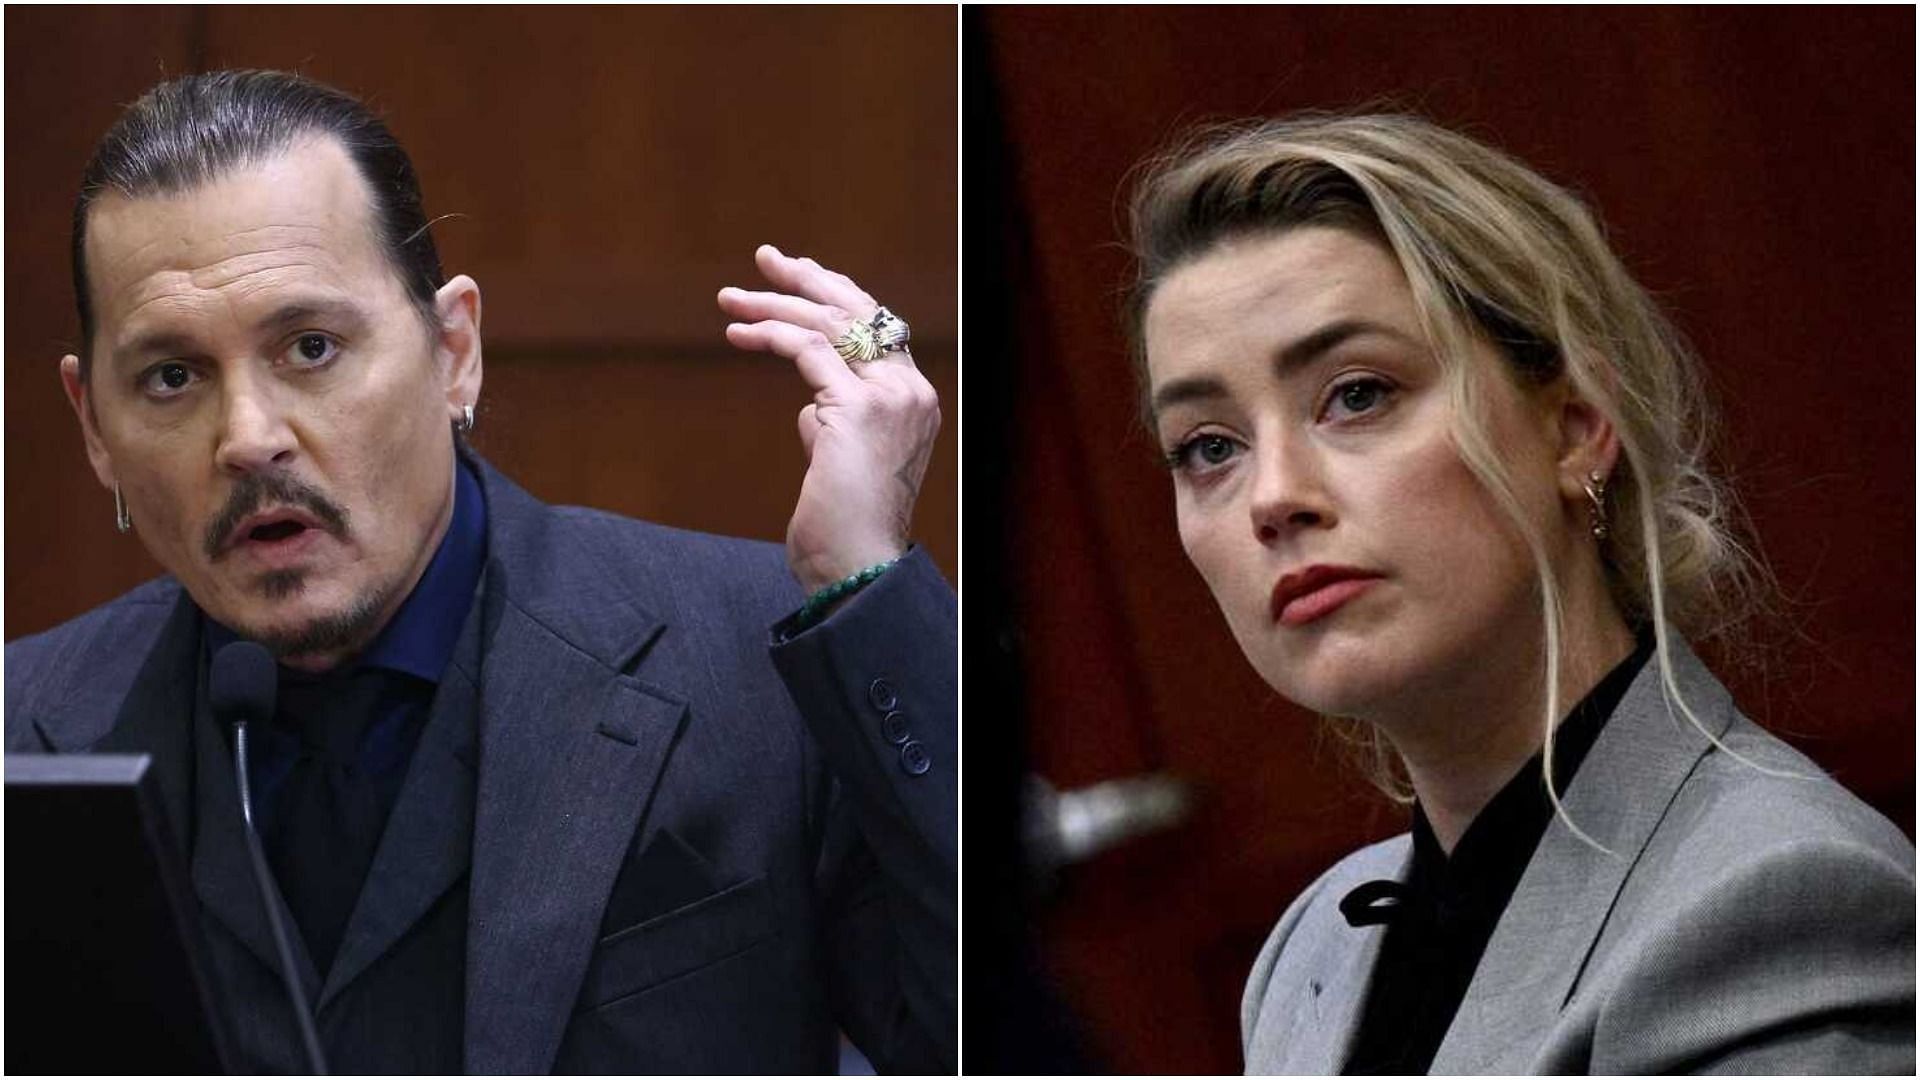 Johnny Depp and Amber Heard in court (Image via Jim Lo Scalzo/AFP/Getty Images and Brendan Smialowski/POOL/AFP/Getty Images)